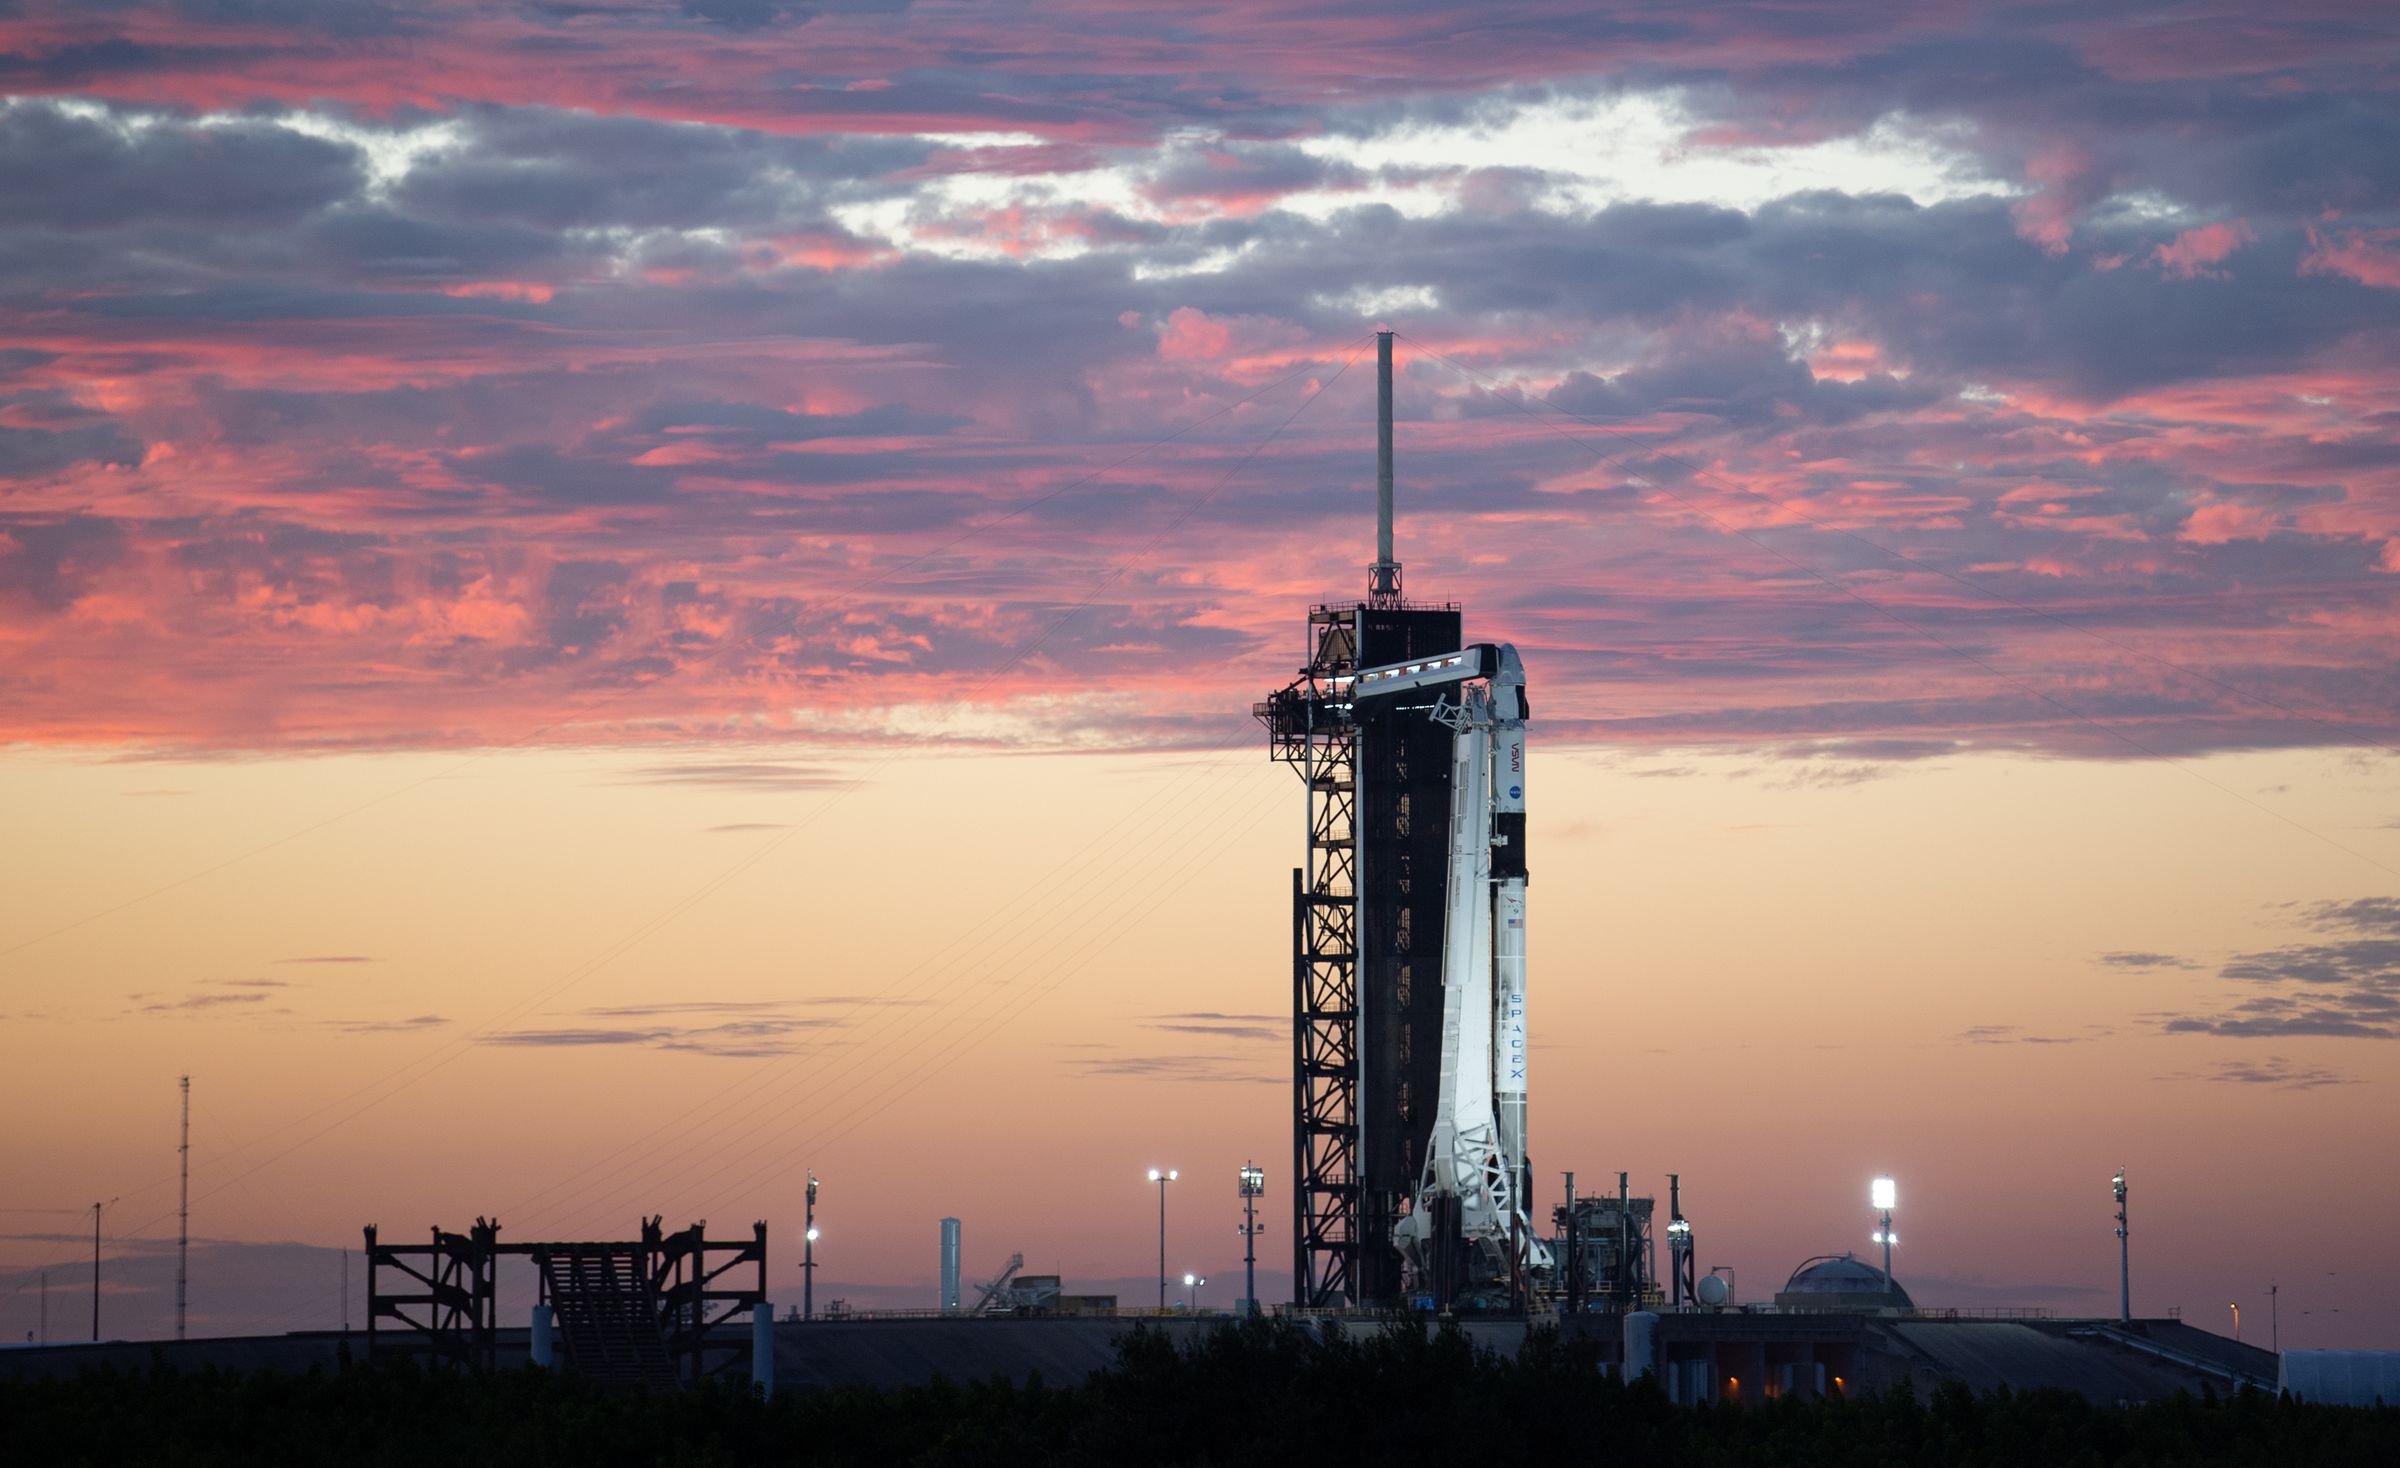 SpaceX’s Falcon 9 rocket and Crew Dragon, at the company’s LC-39A launch site.